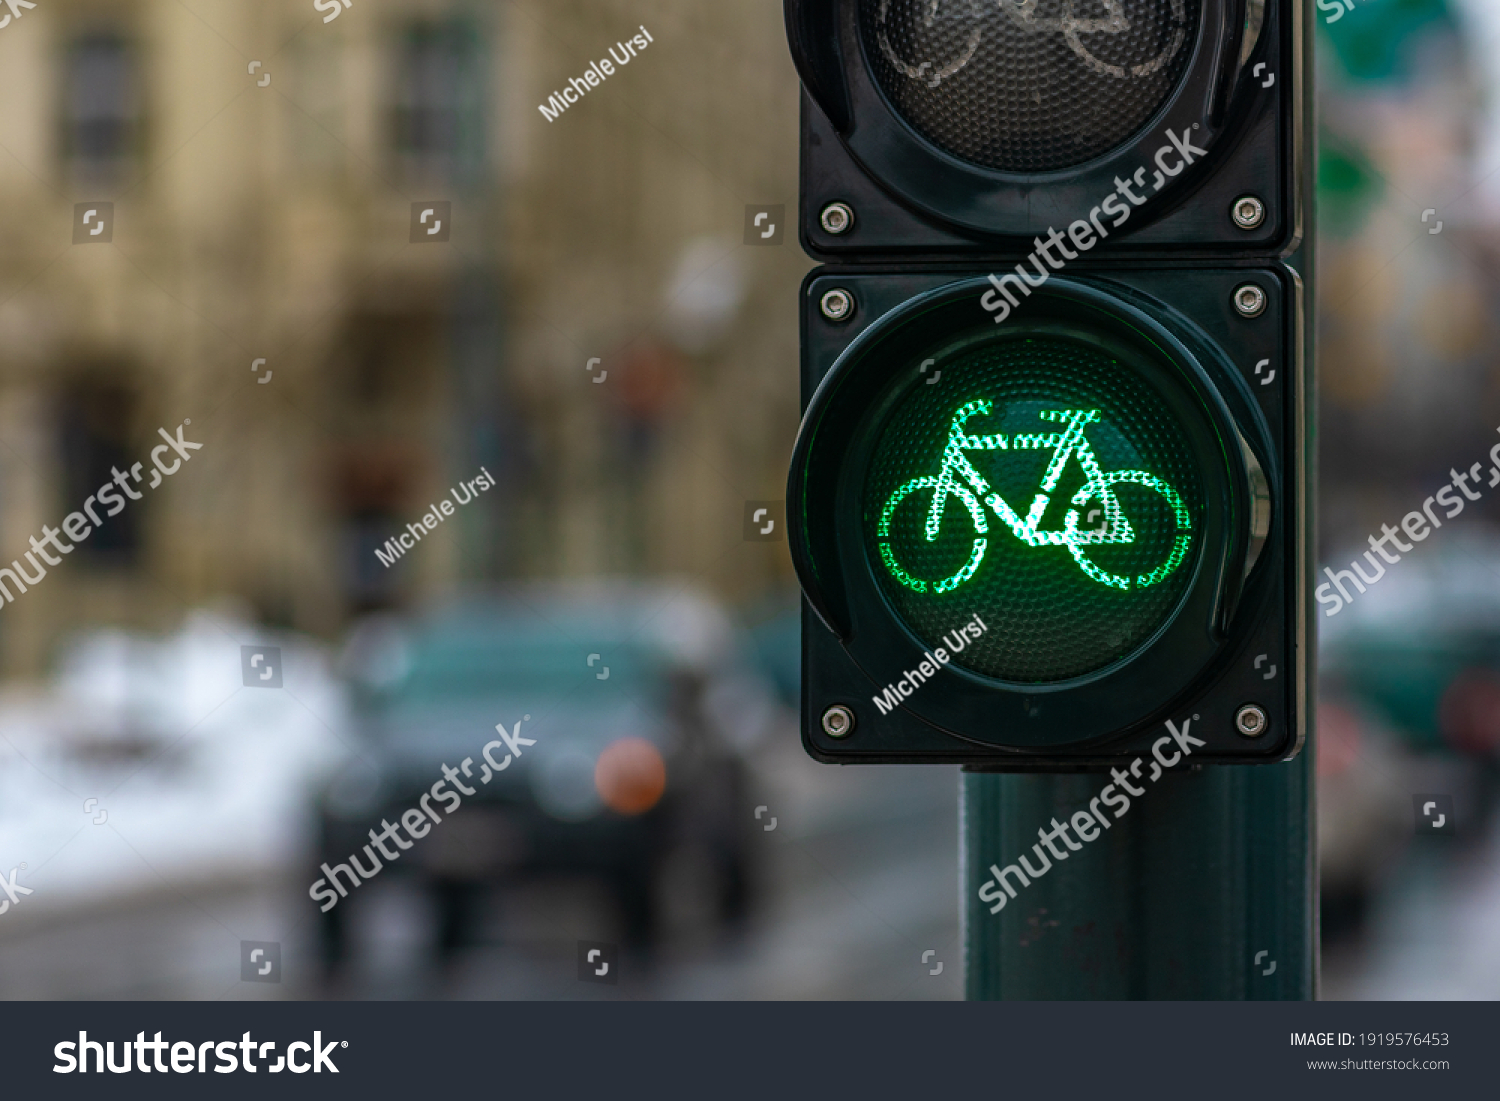 Sustainable transport. Bicycle traffic signal, green light, road bike, free bike zone or area, bike sharing, close up with street and car on background #1919576453